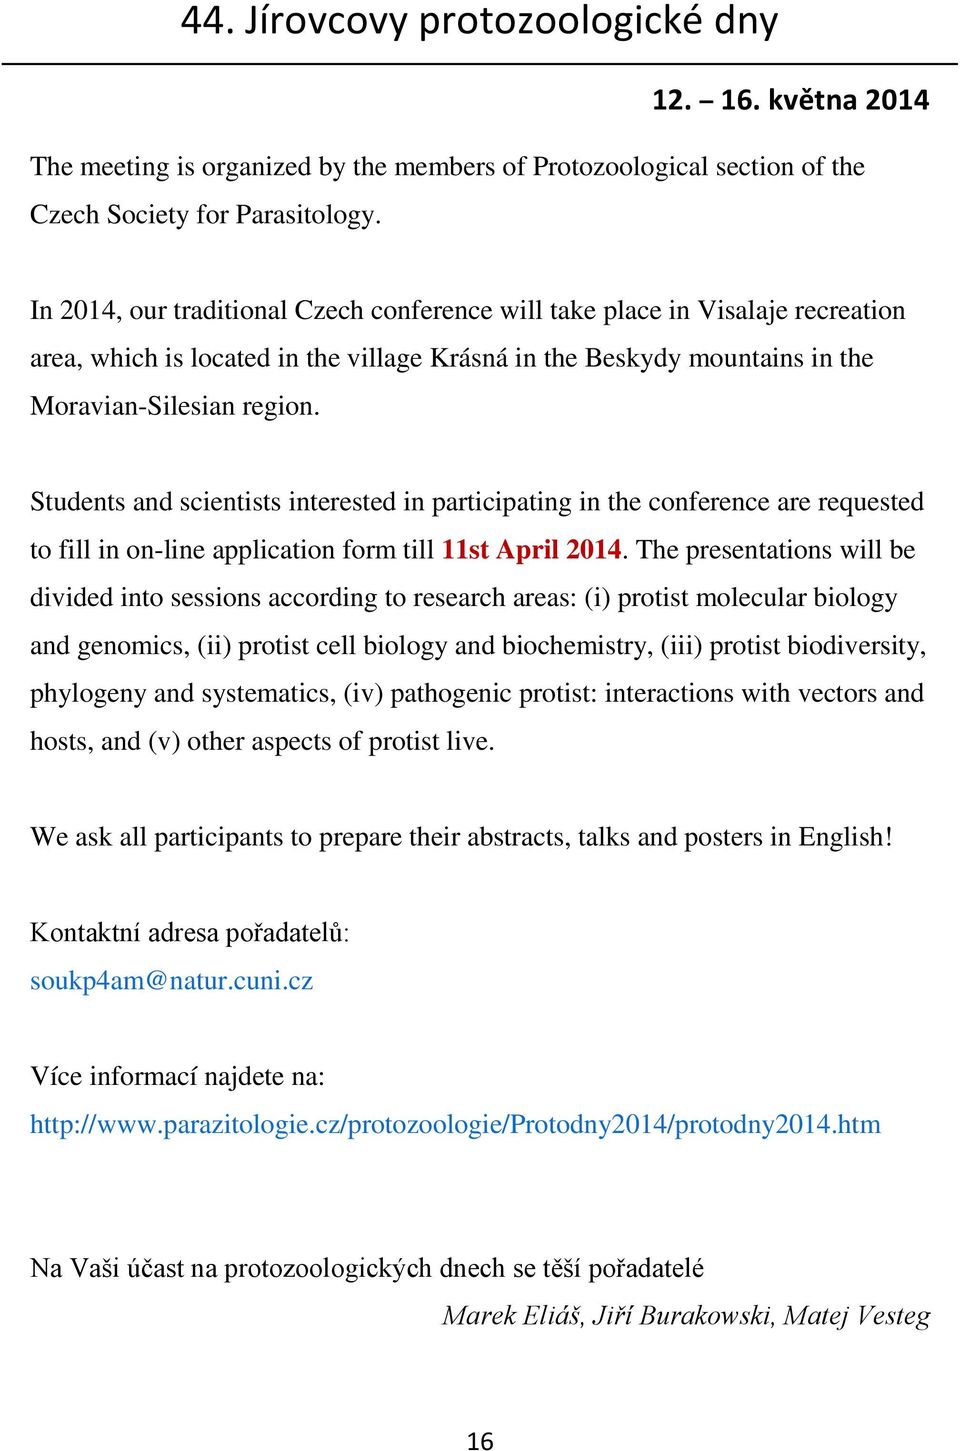 Students and scientists interested in participating in the conference are requested to fill in on-line application form till 11st April 2014.